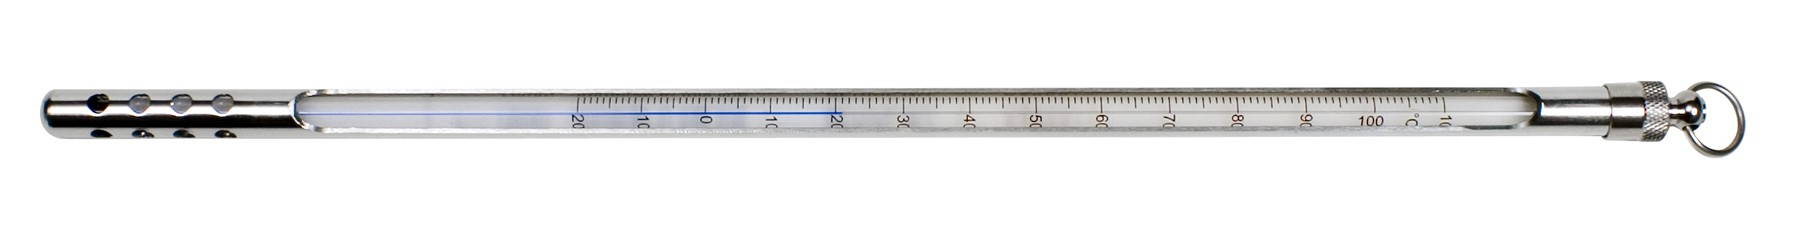 H-B DURAC Plus Armored Liquid-In-Glass Thermometer; 0 to 230F, 76mm Immersion, Organic Liquid Fill